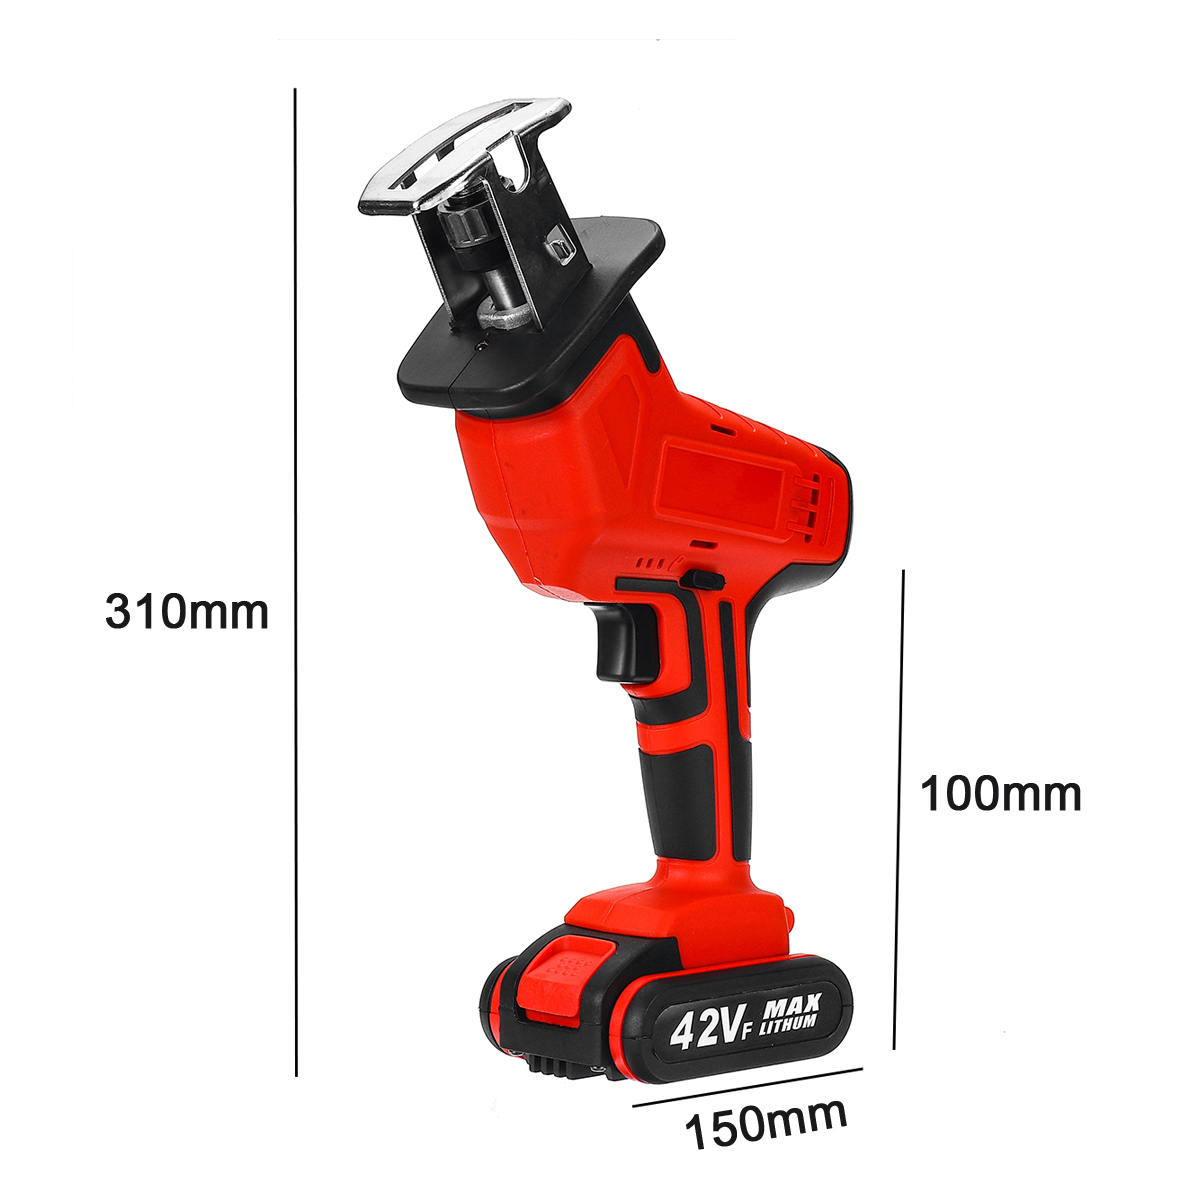 42VF-13000mAh-Cordless-Reciprocating-Saw-Electric-Saws-Portable-Woodworking-Power-Tools-1640981-4